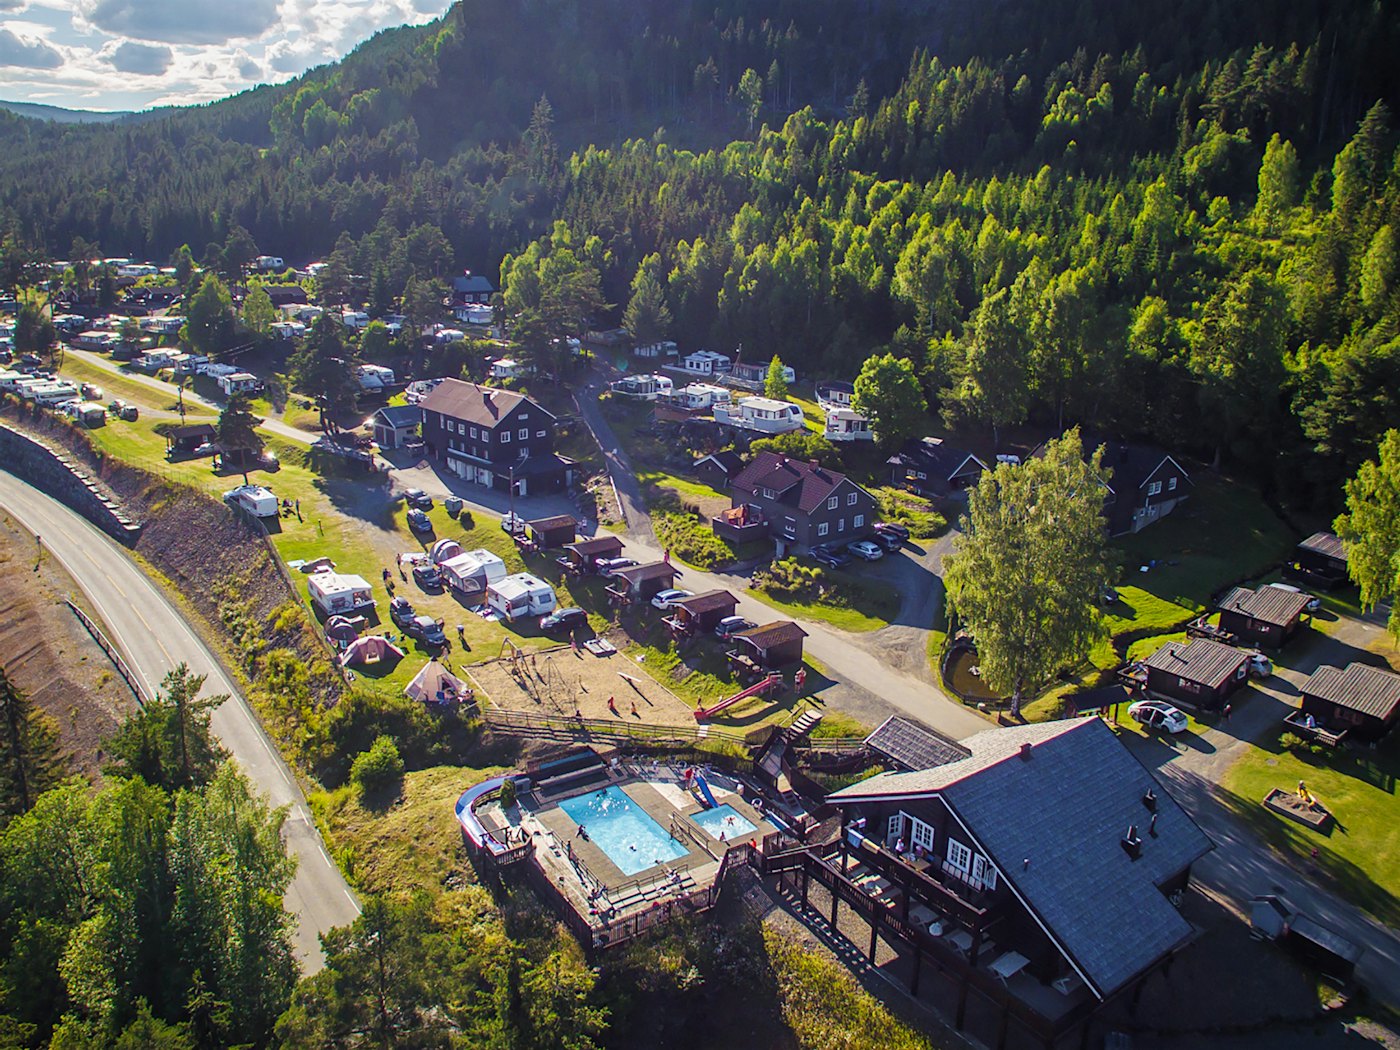 drone image of the restaurant, pool area, playground, cabins and camping pitches